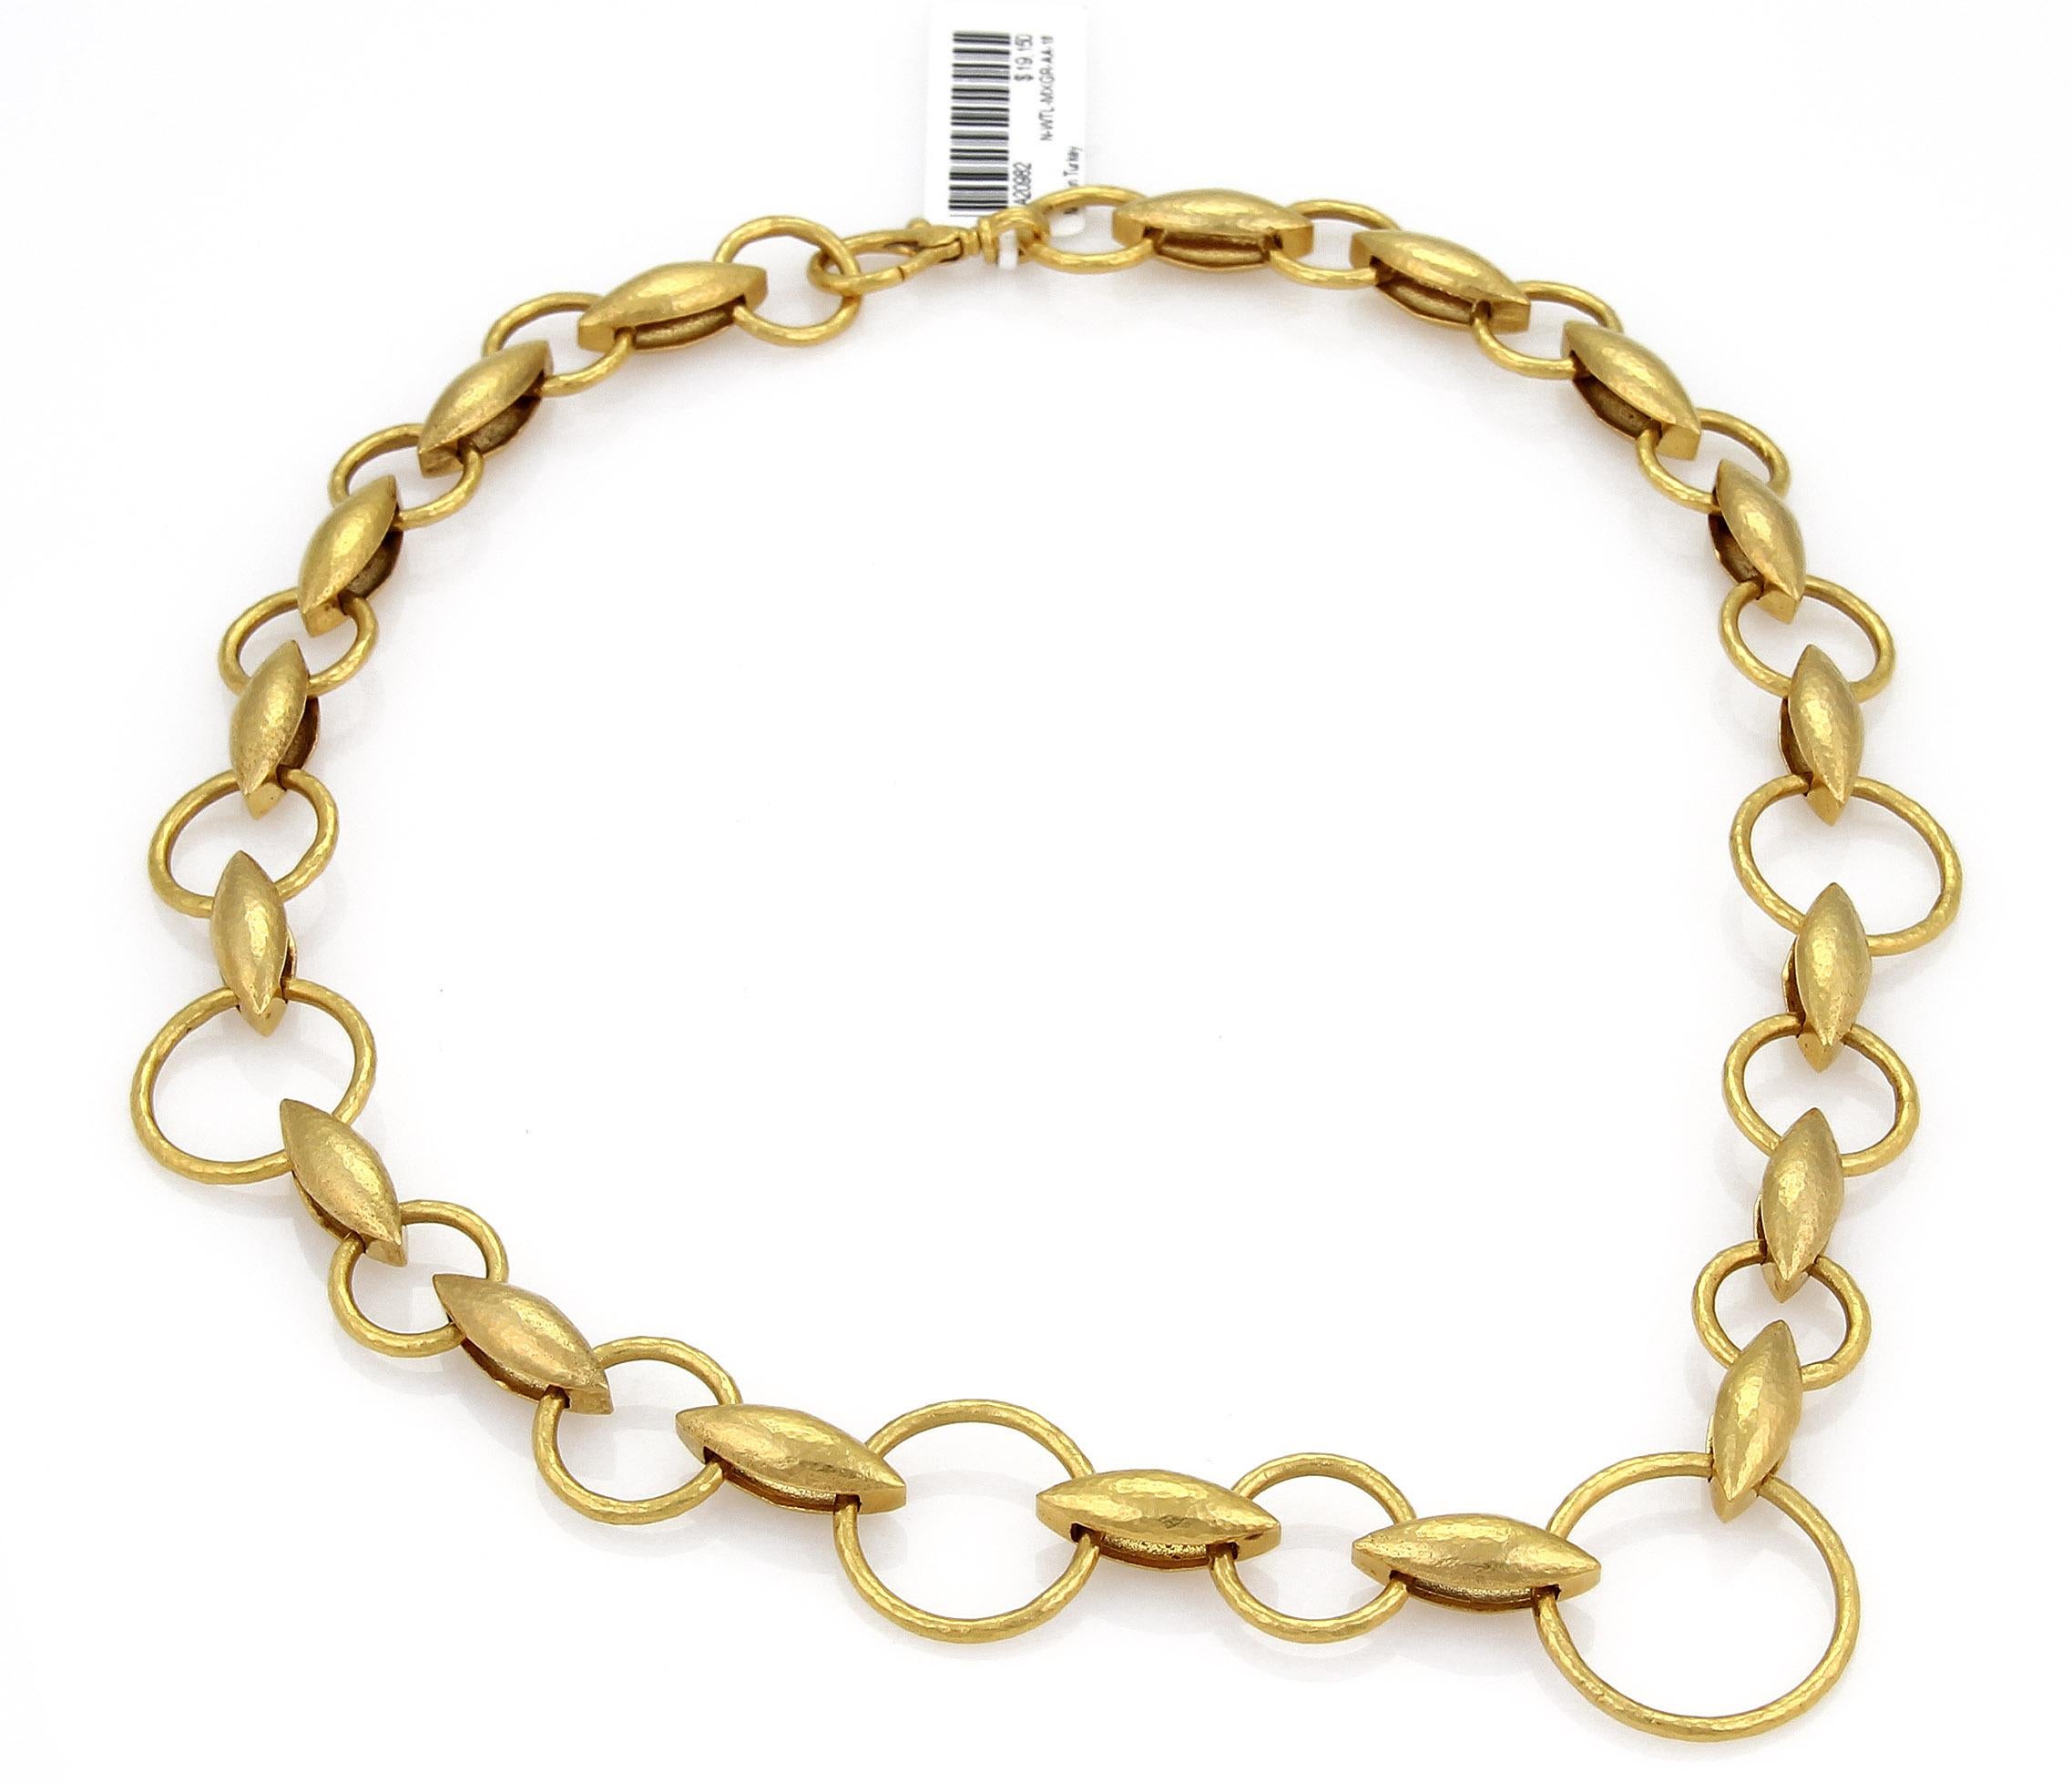 This lovely authentic necklace is by Gurhan from the WHEATLA collection. It is crafted from solid 24k yellow gold in a fine hand hammered finish. There are assorted large, medium and small open round links joined together with a double side wheat